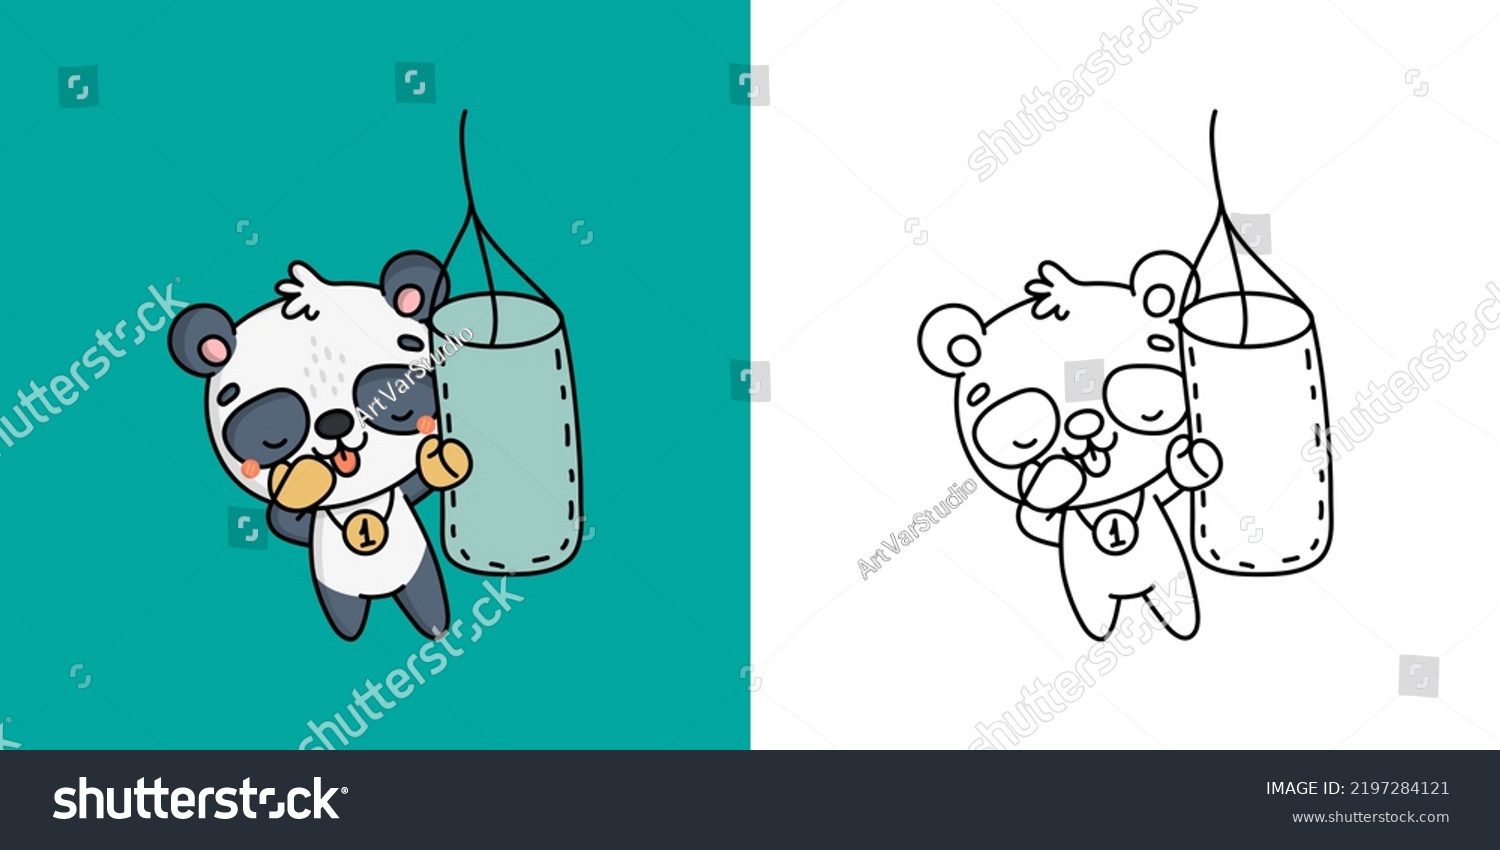 SVG of Panda Bear Sportsman Clipart for Coloring Page and Multicolored Illustration. Adorable Panda Athlete. Vector Illustration of a Kawaii Animal for Coloring Pages, Prints for Clothes, Stickers.
 svg